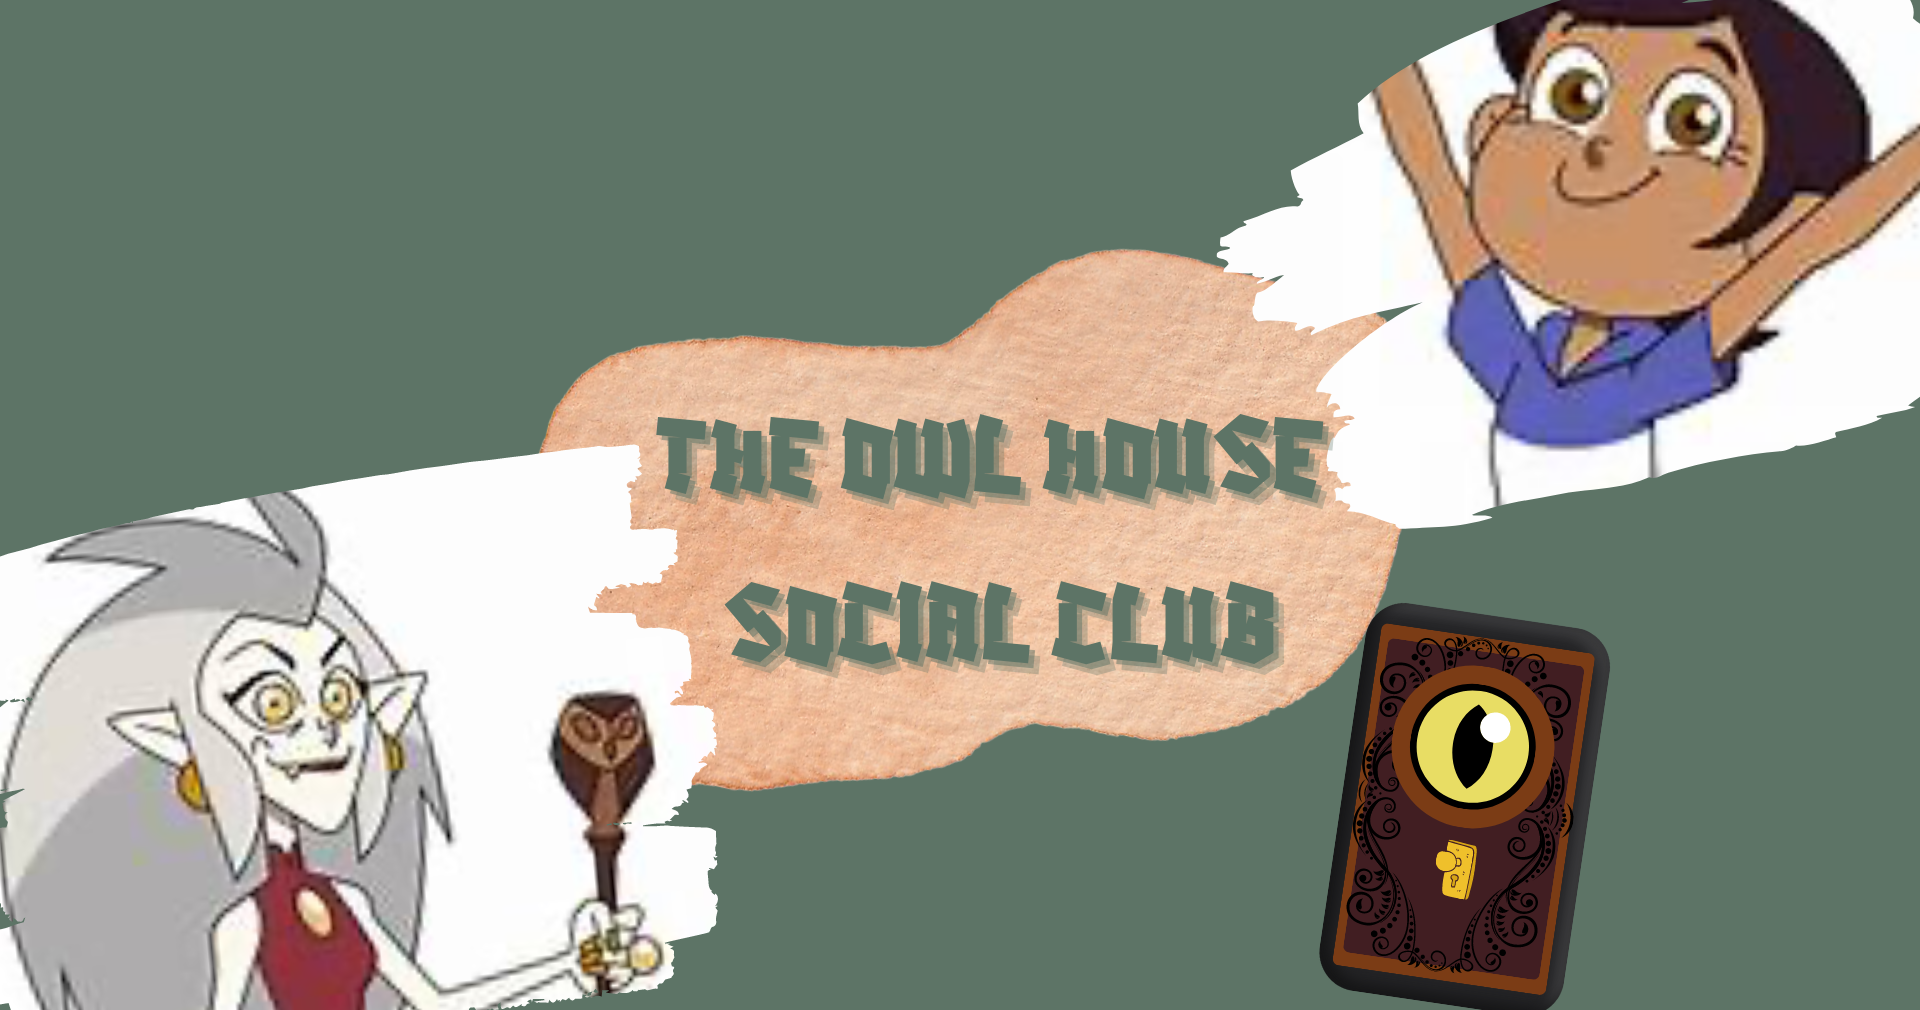 The Owl House Social Club | Small Online Class for Ages 9-13